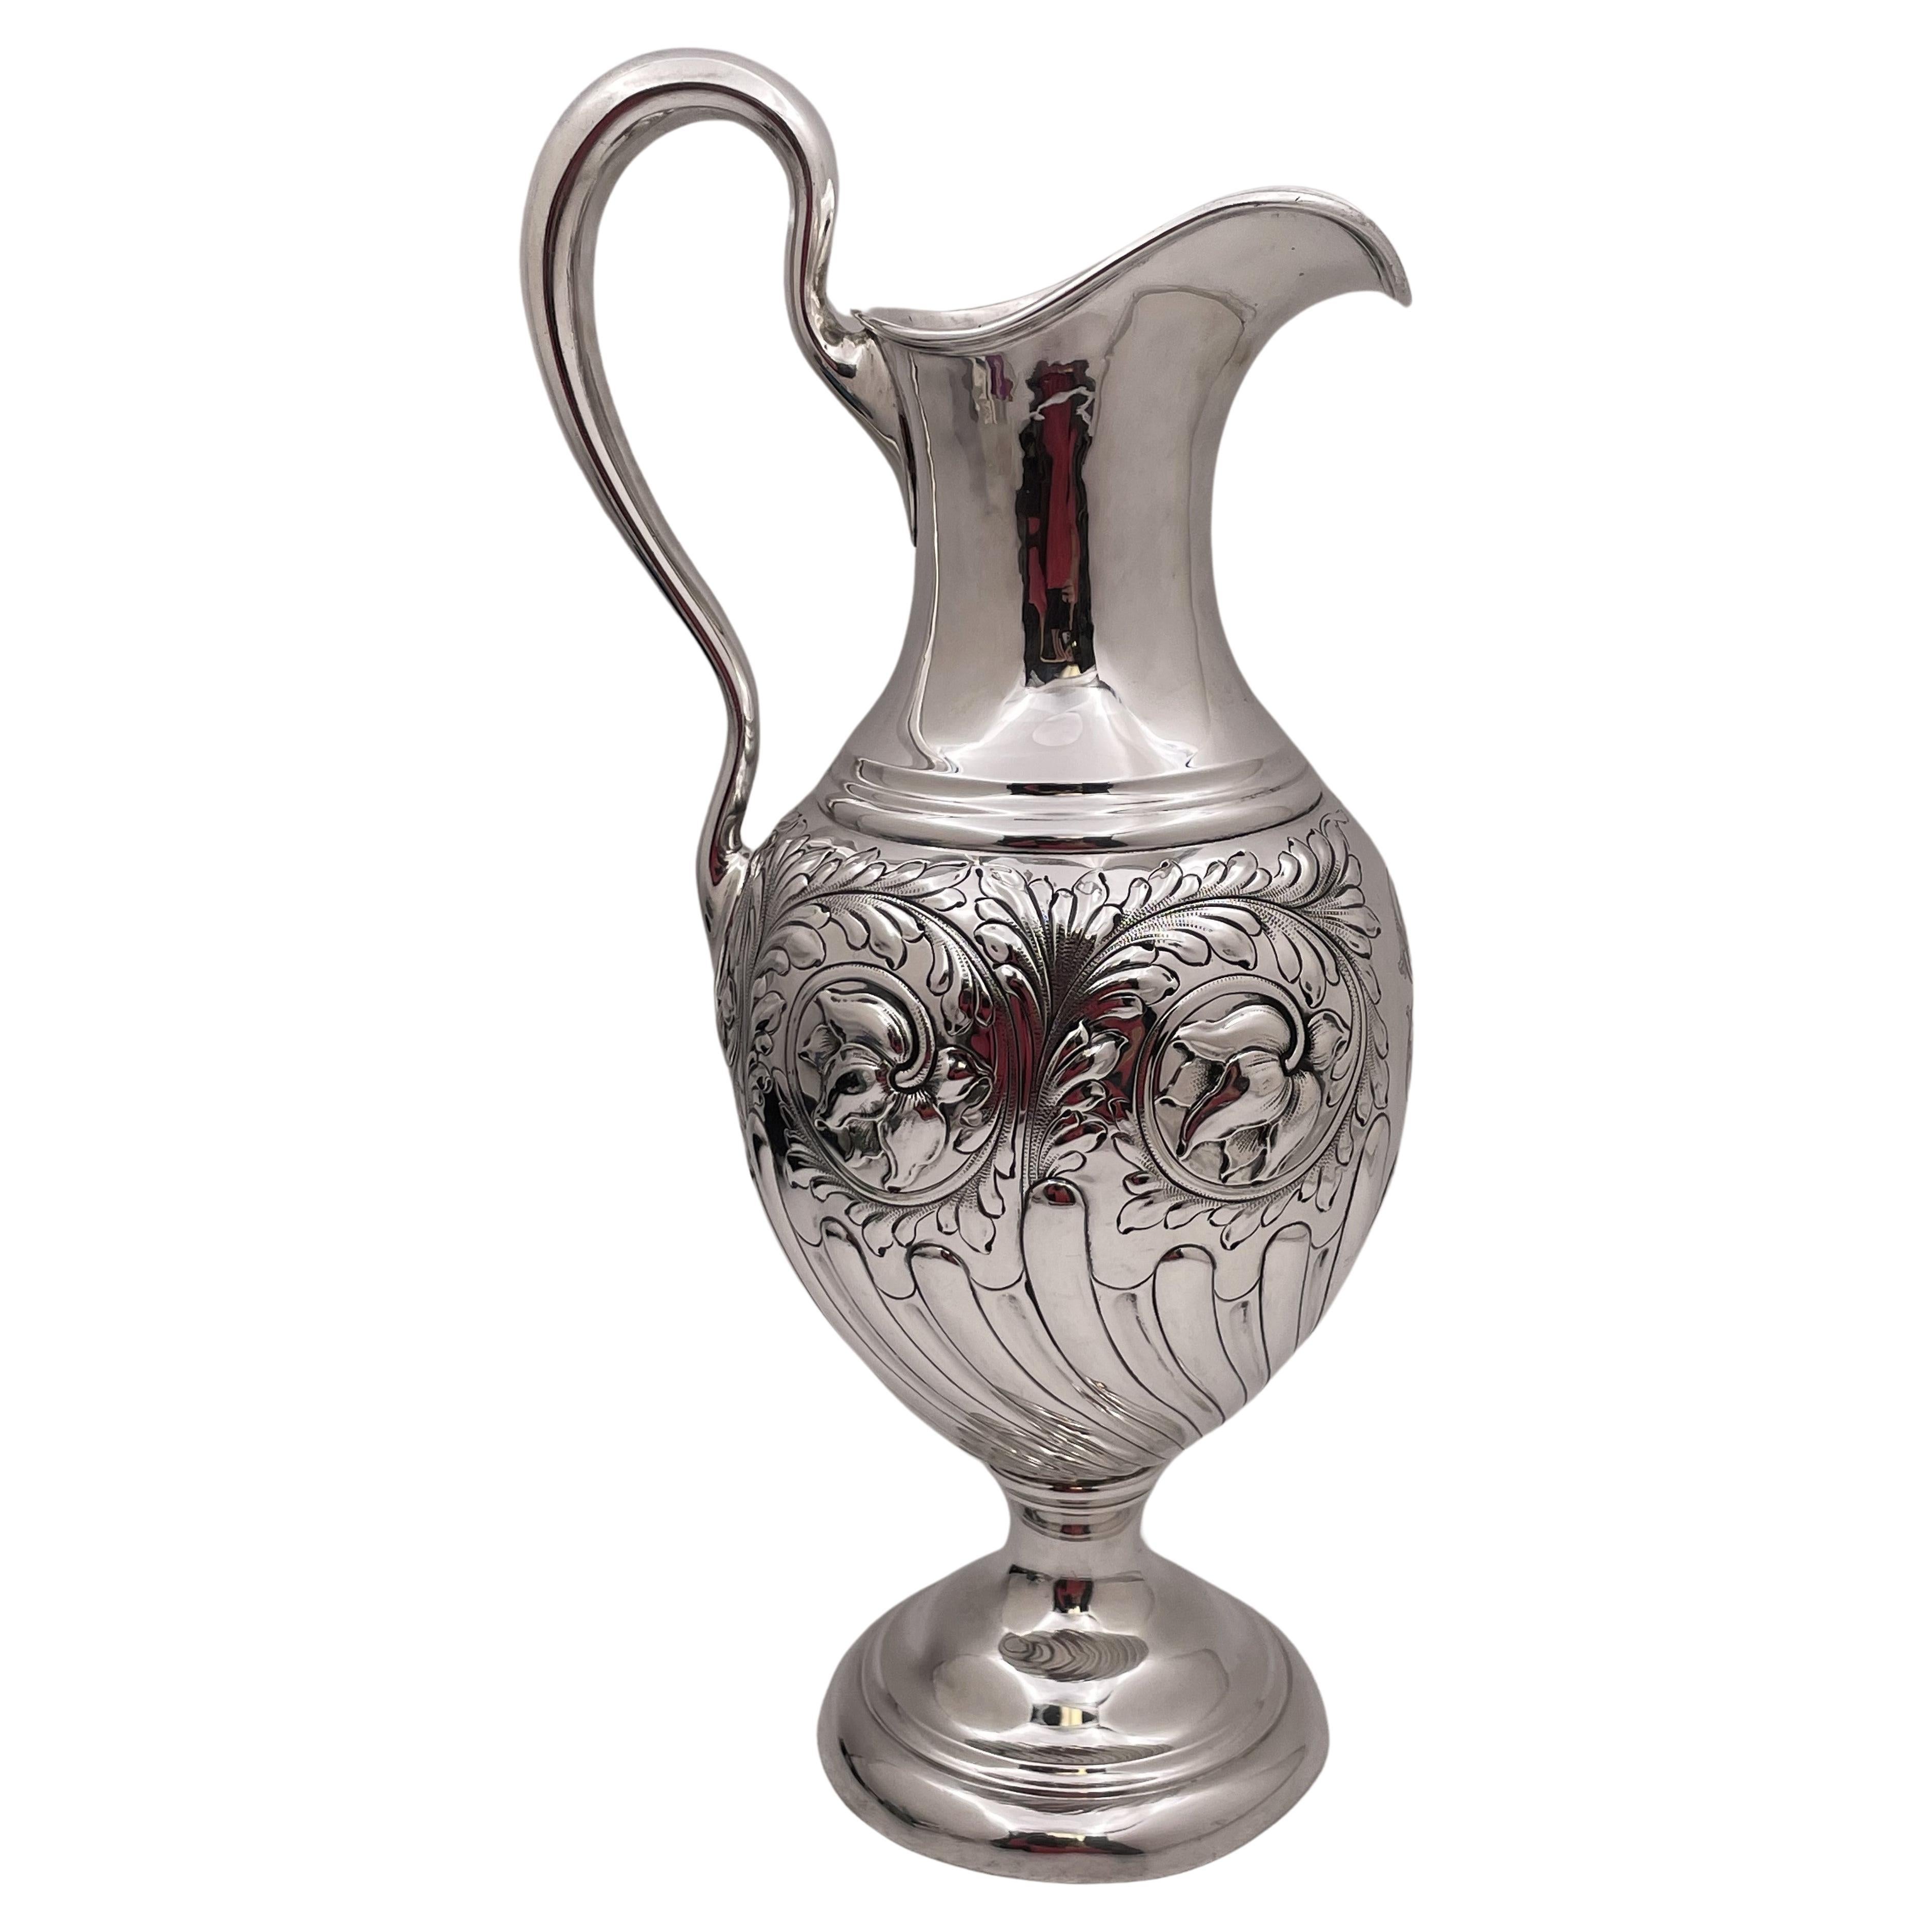 Lebkuecher Sterling Silver Pitcher Jug in Art Nouveau Style Early 20th Century For Sale